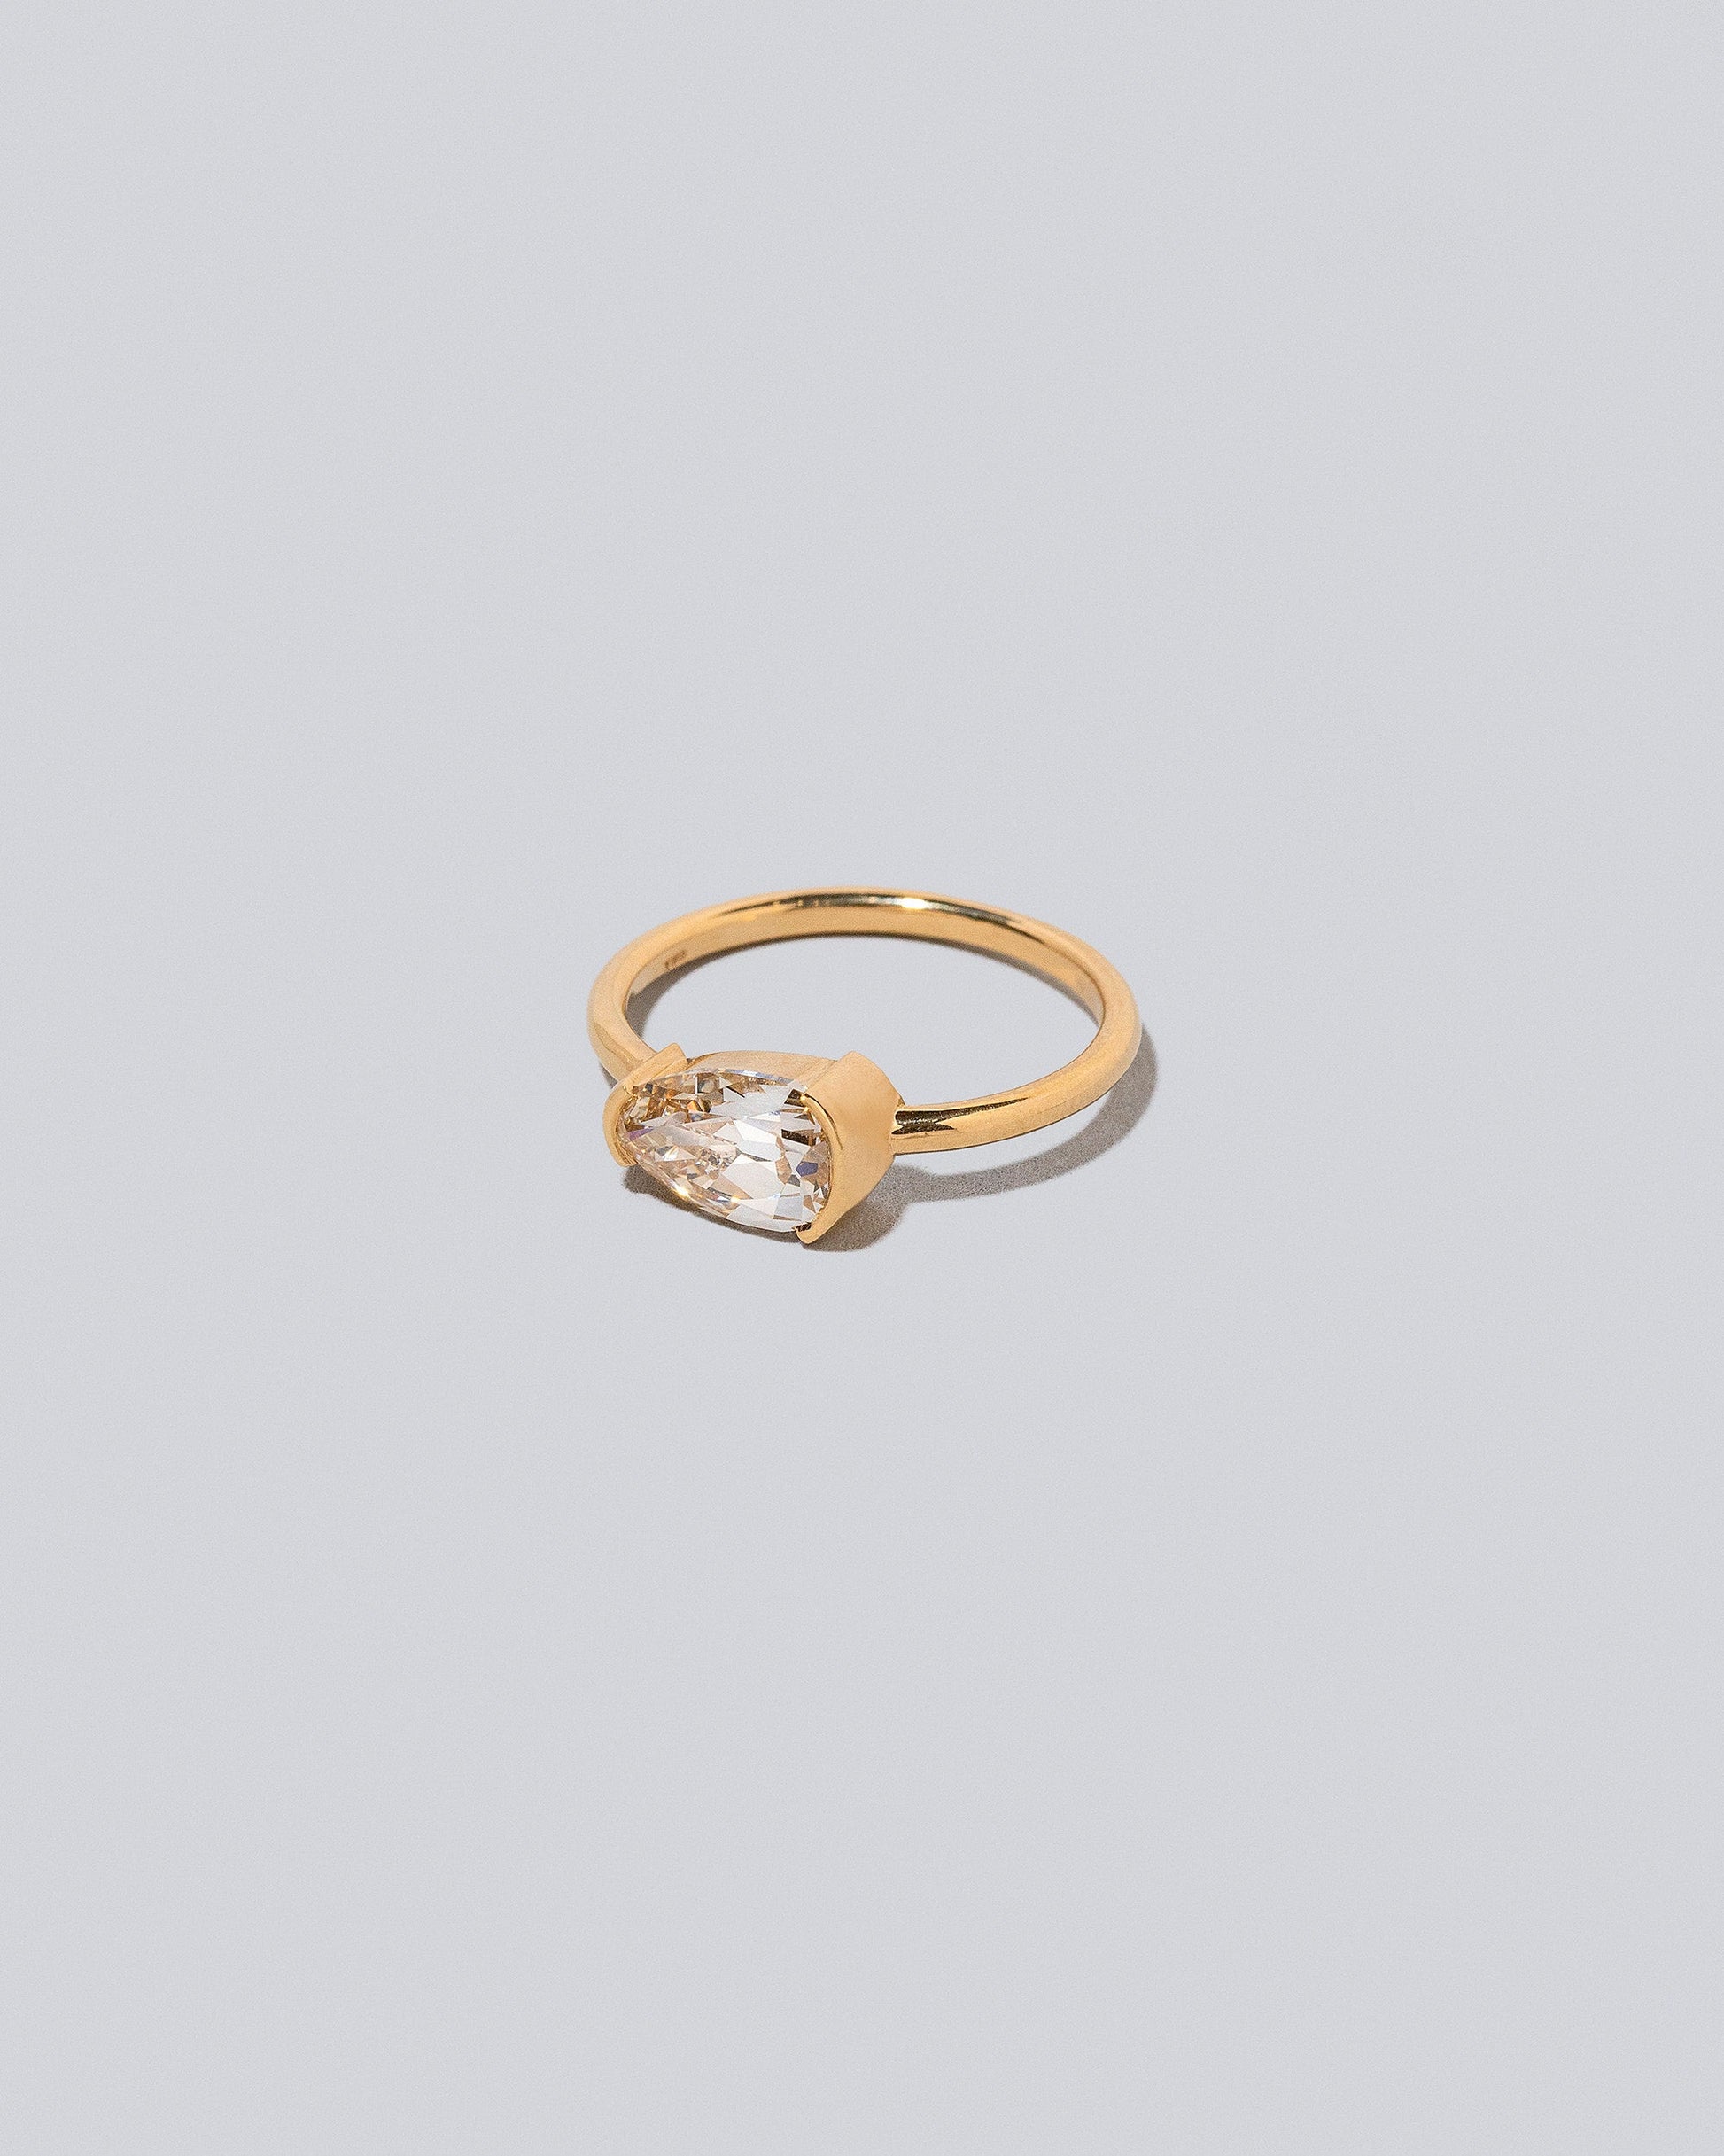 Innerspace Ring on light colored background.